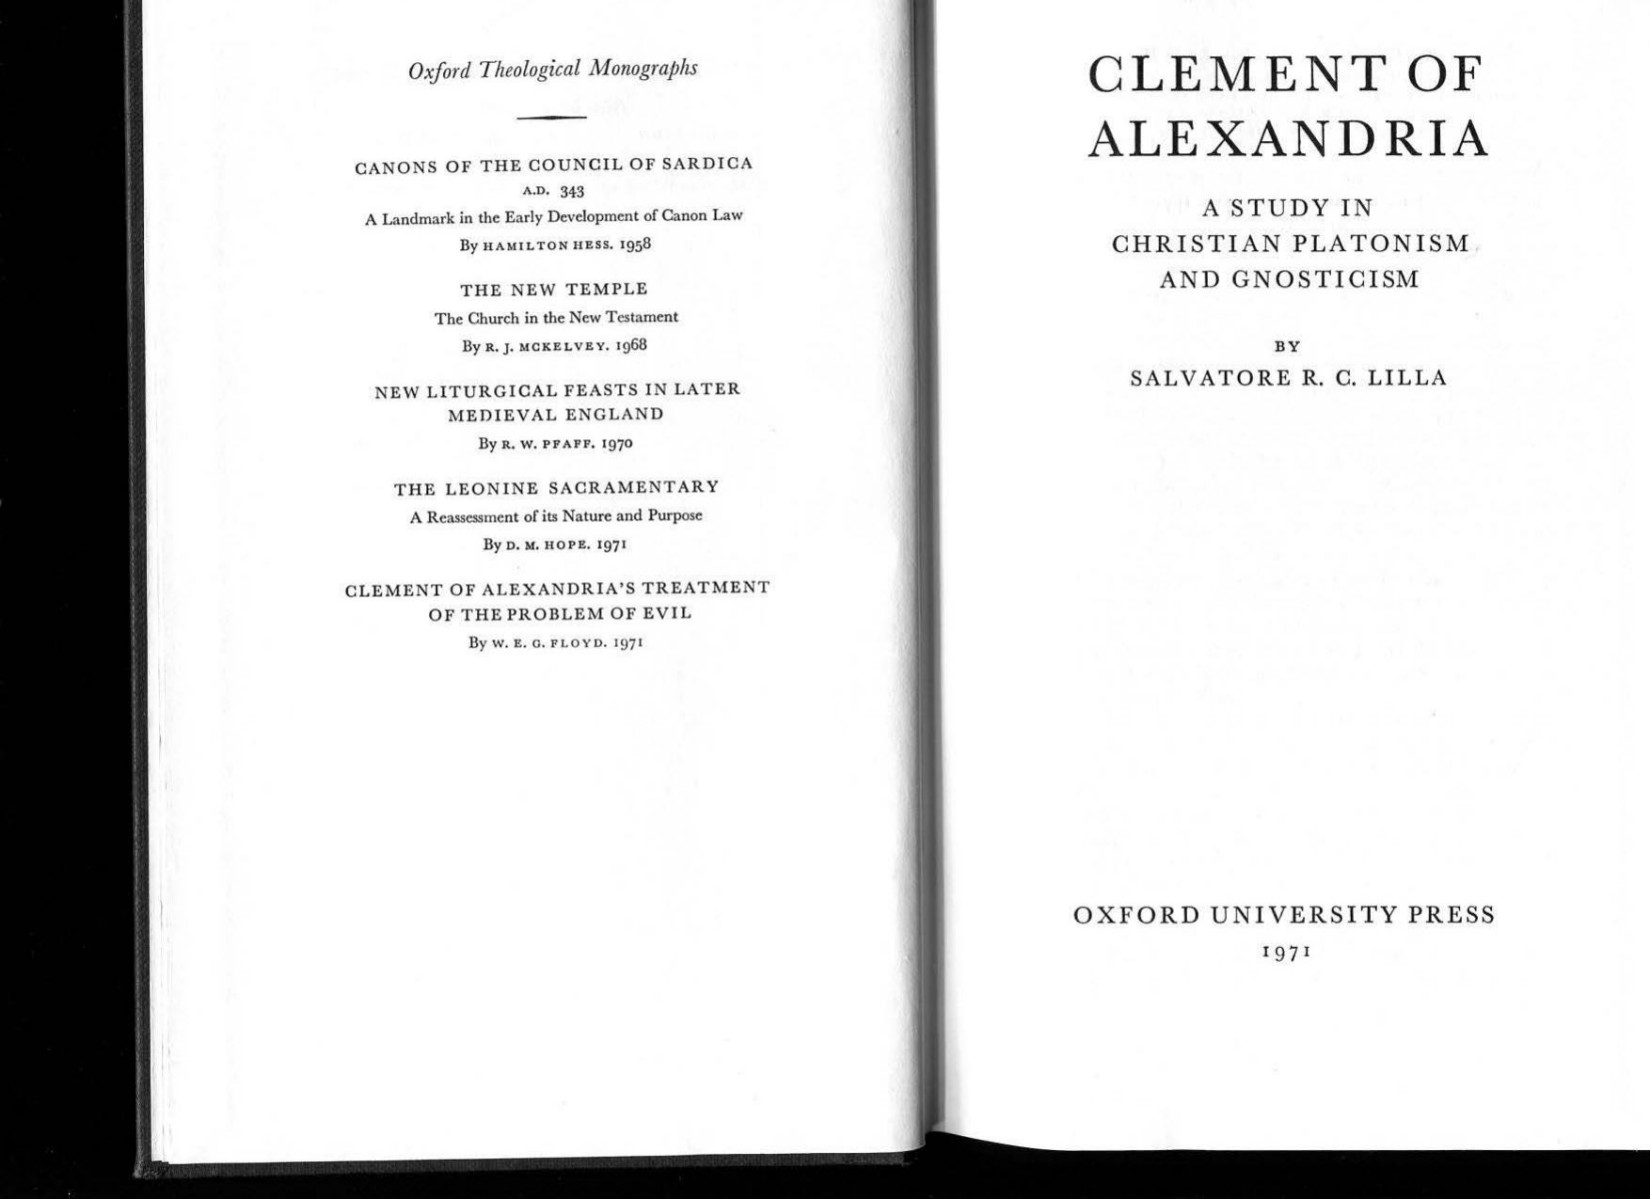 Clement of Alexandria. A Study in Christian Platonism and Gnosticism